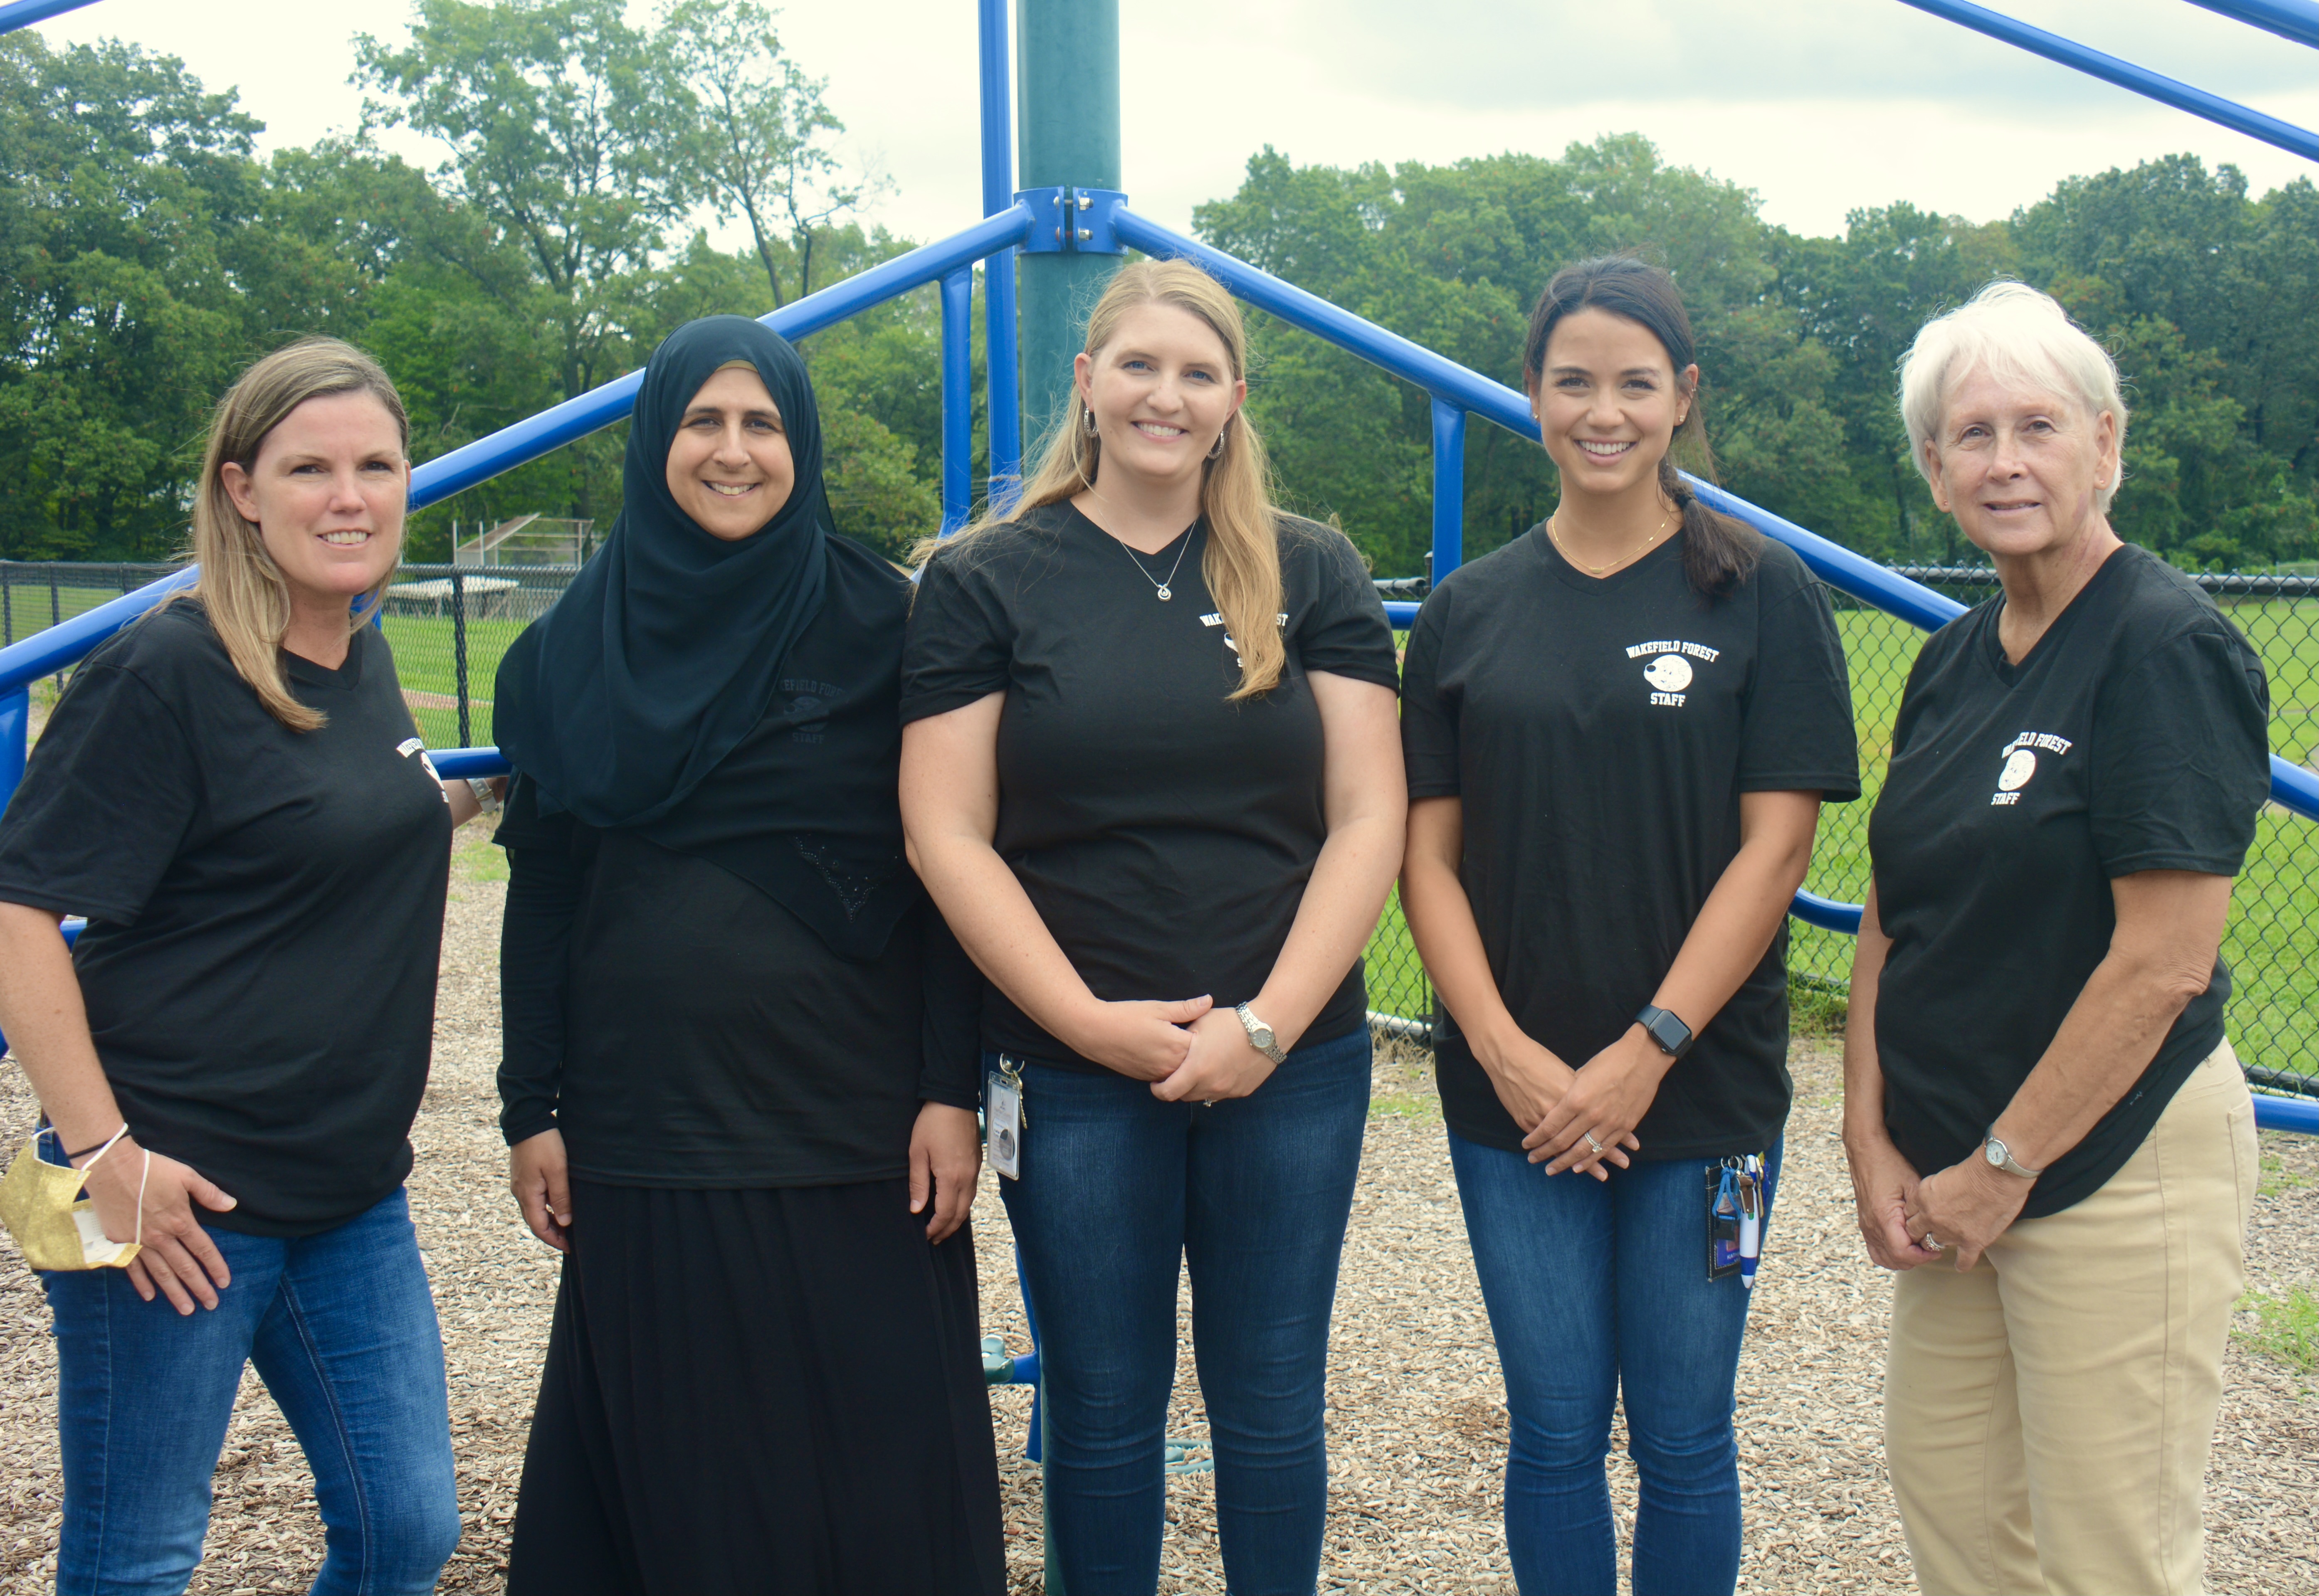 Picture of the second grade team outside on the playground